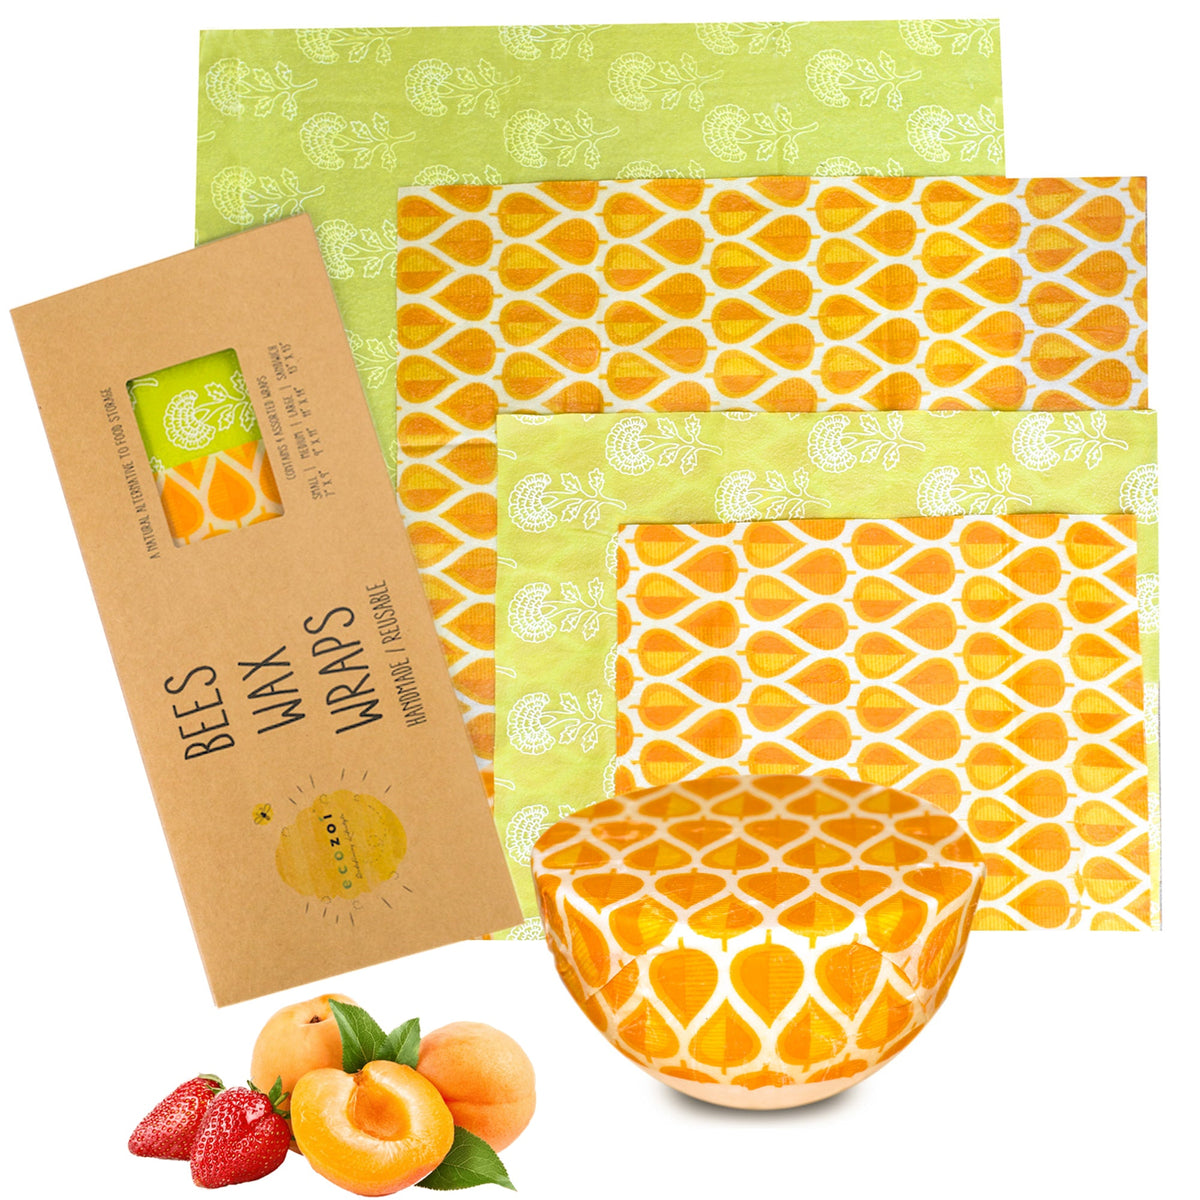 BeesWax Food Wraps, Reusable 4 Pack by ecozoi